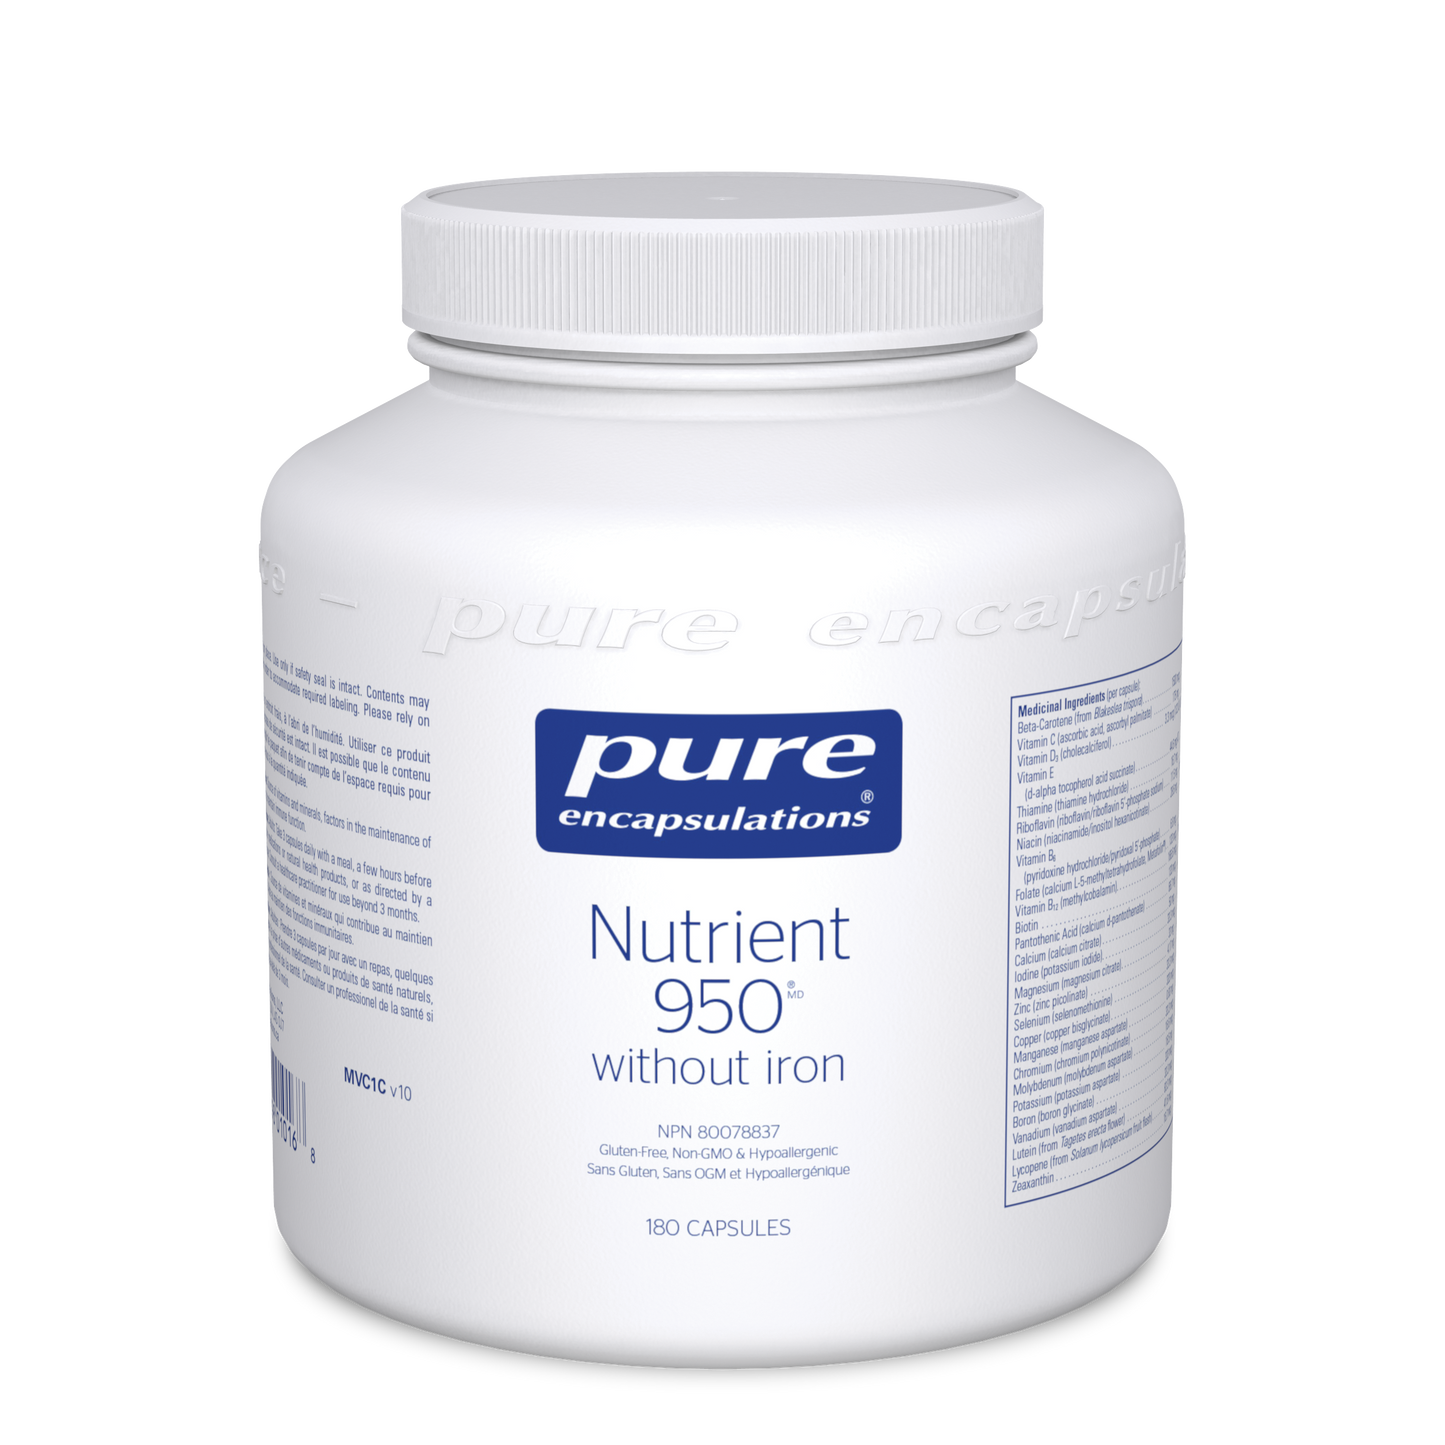 Nutrient 950® without iron